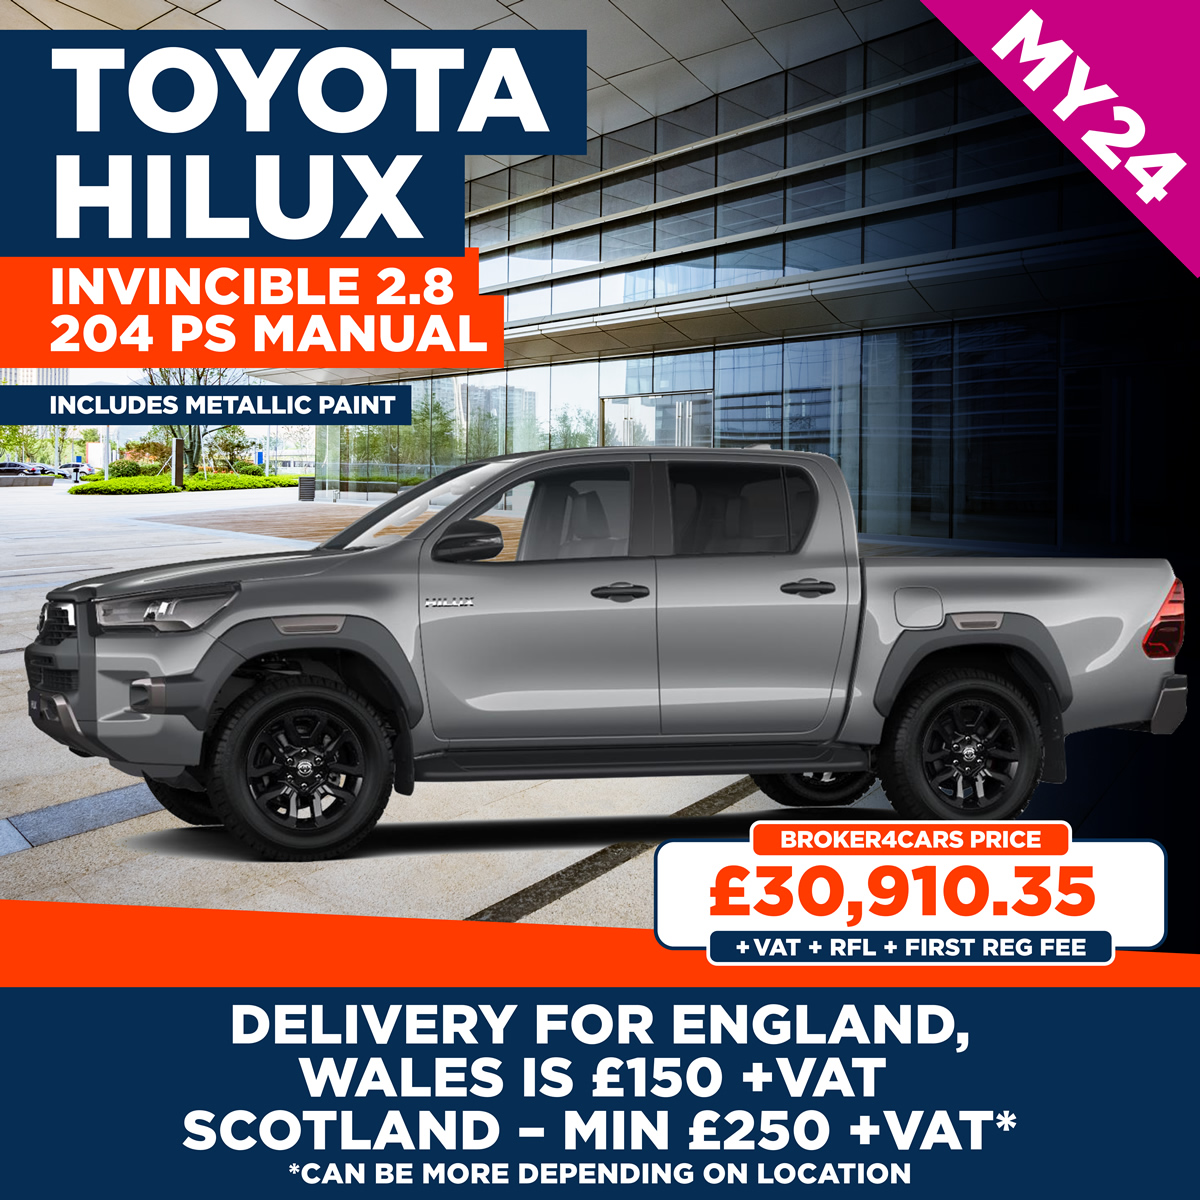 New MY24 Toyota Hilux Invincible 2.8 204 PS Manual includes metallic paint. Delivery for England and Wales is £150- plus VAT. Scotland – Min £250 plus VAT, but can be more depending on location. £30,910.35+VAT + RFL £335+ First Reg Fee £55